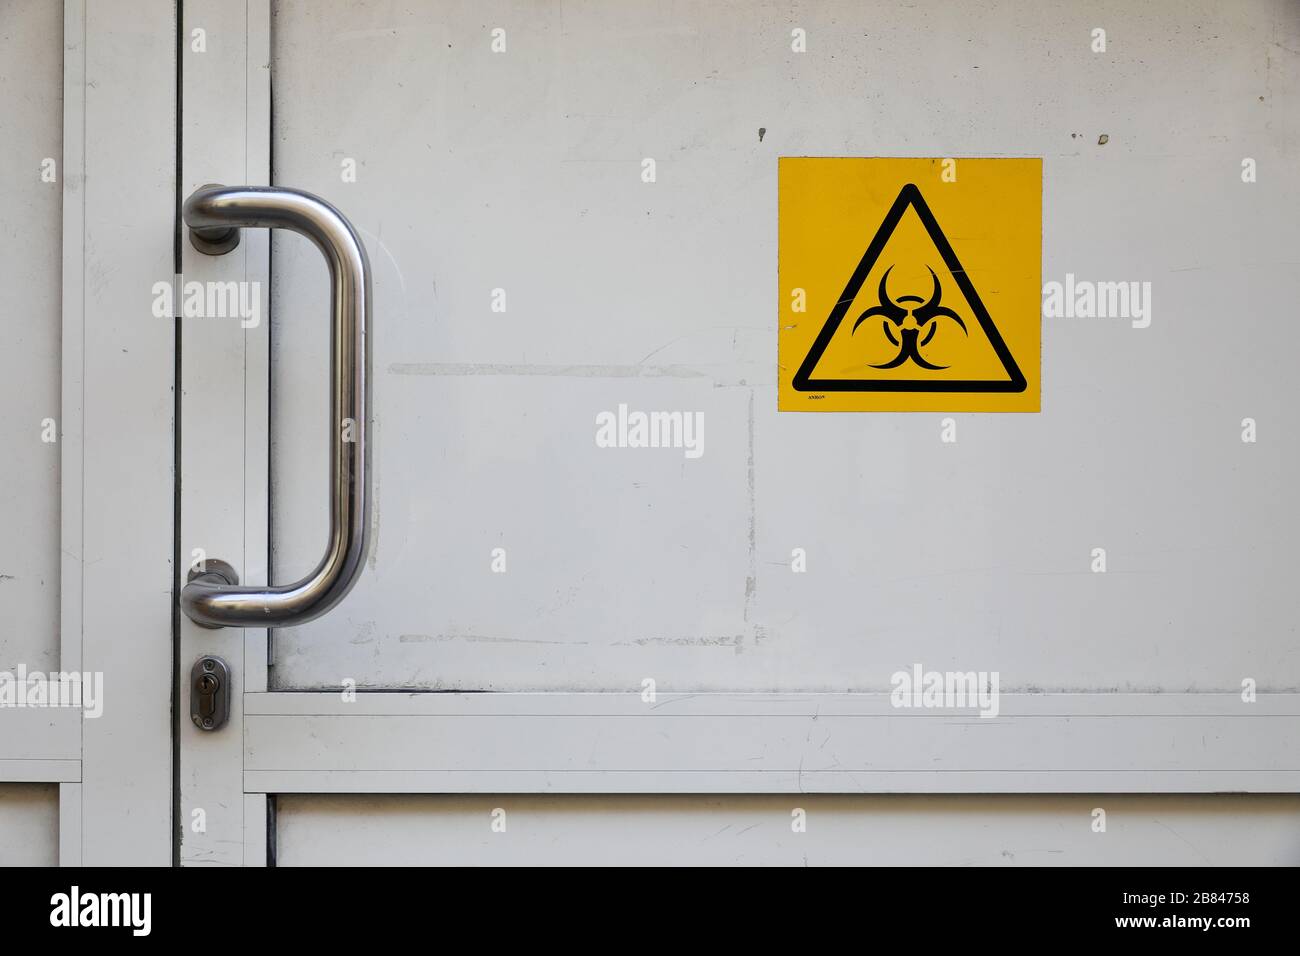 Cracow, Lesser Poland, Poland. 17th Mar, 2020. A bio-hazard sign on the door leading to the construction site in an old building during the corona virus pandemic.Polish Government has introduced a state of epidemiological emergency and closed borders. Most public places like schools, universities, restaurants, etc. have been closed to prevent the spread of coronavirus. Credit: Filip Radwanski/SOPA Images/ZUMA Wire/Alamy Live News Stock Photo